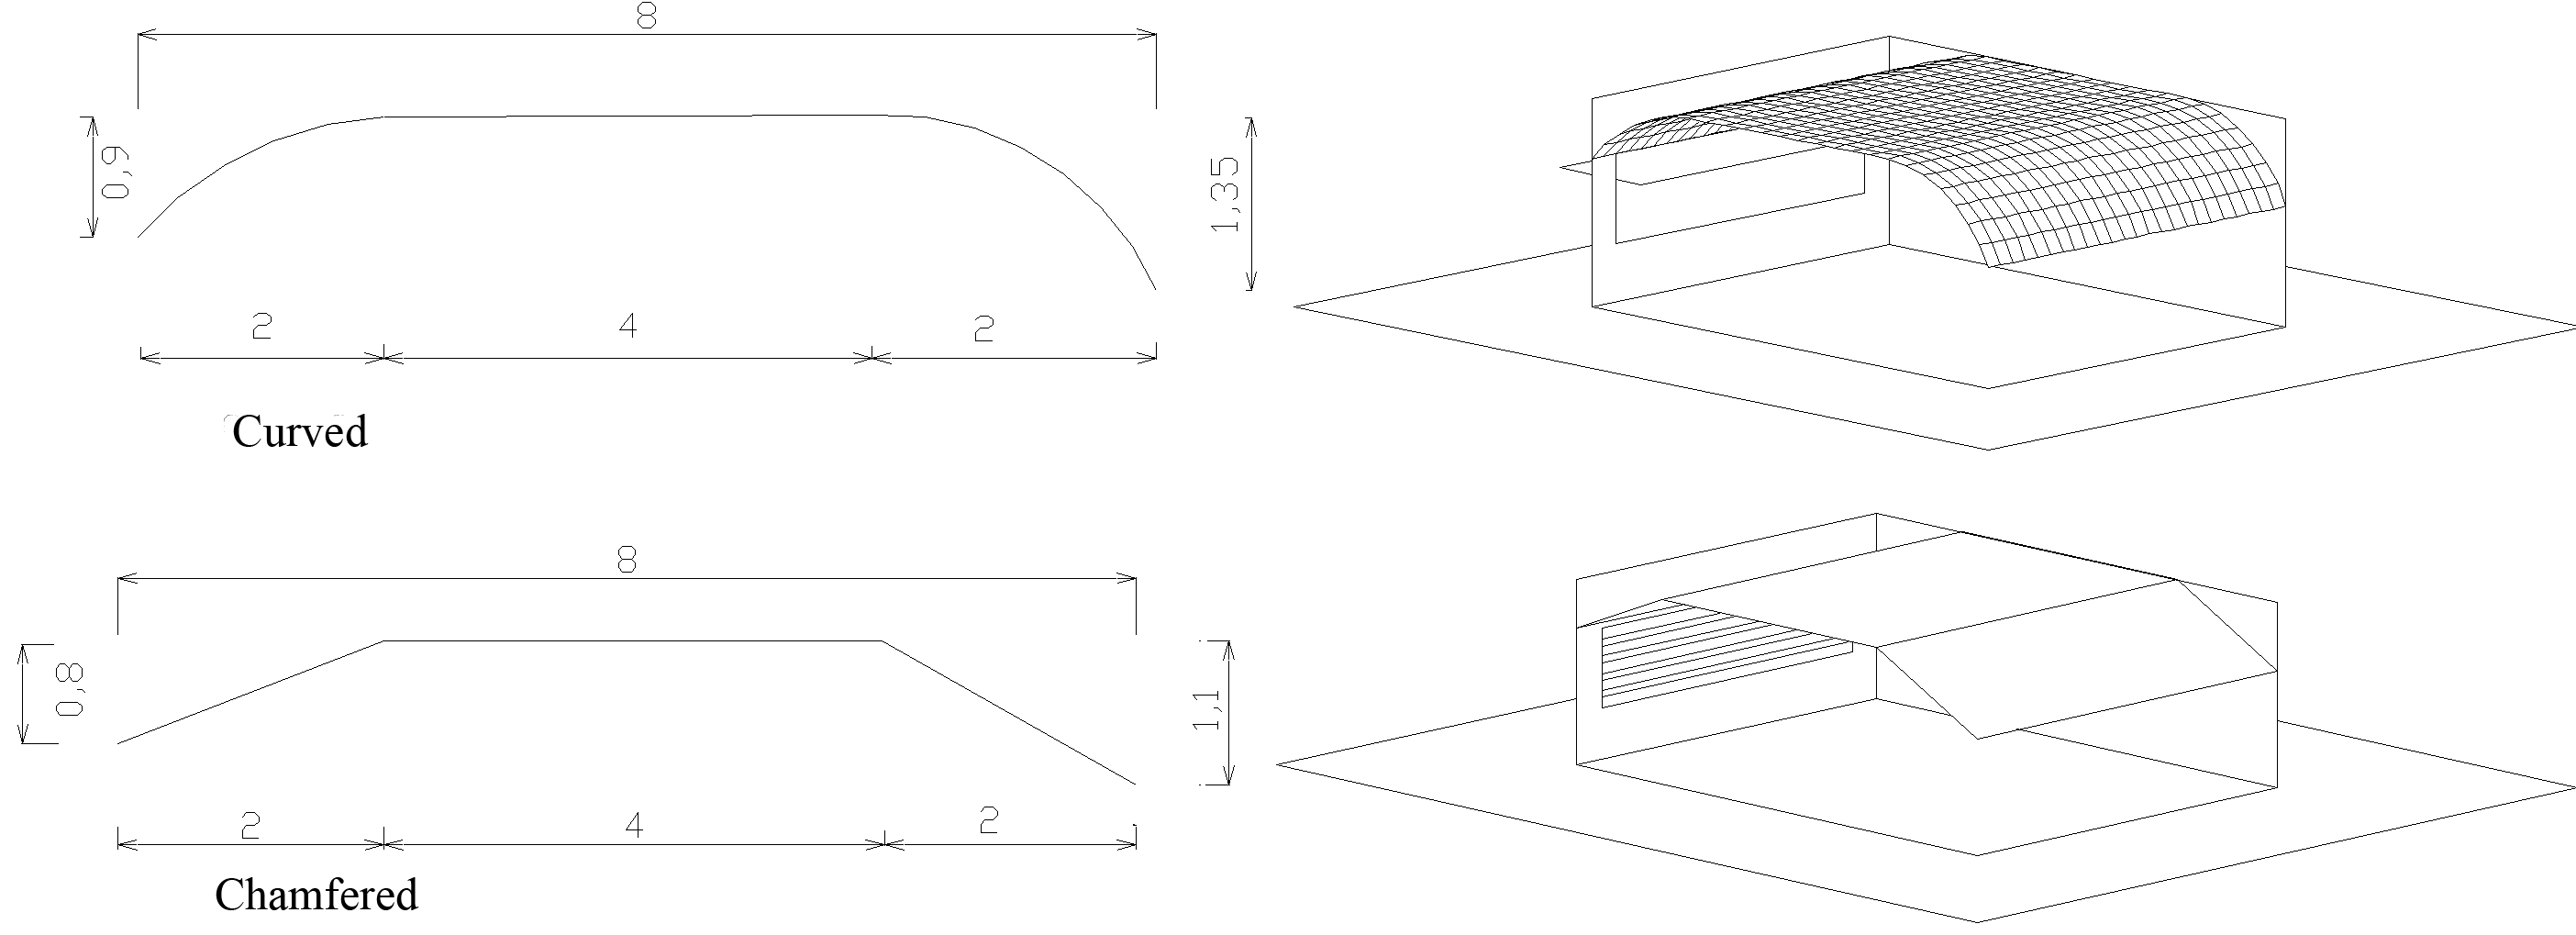 Curved and chamfered ceiling dimensions and AutoCAD images.